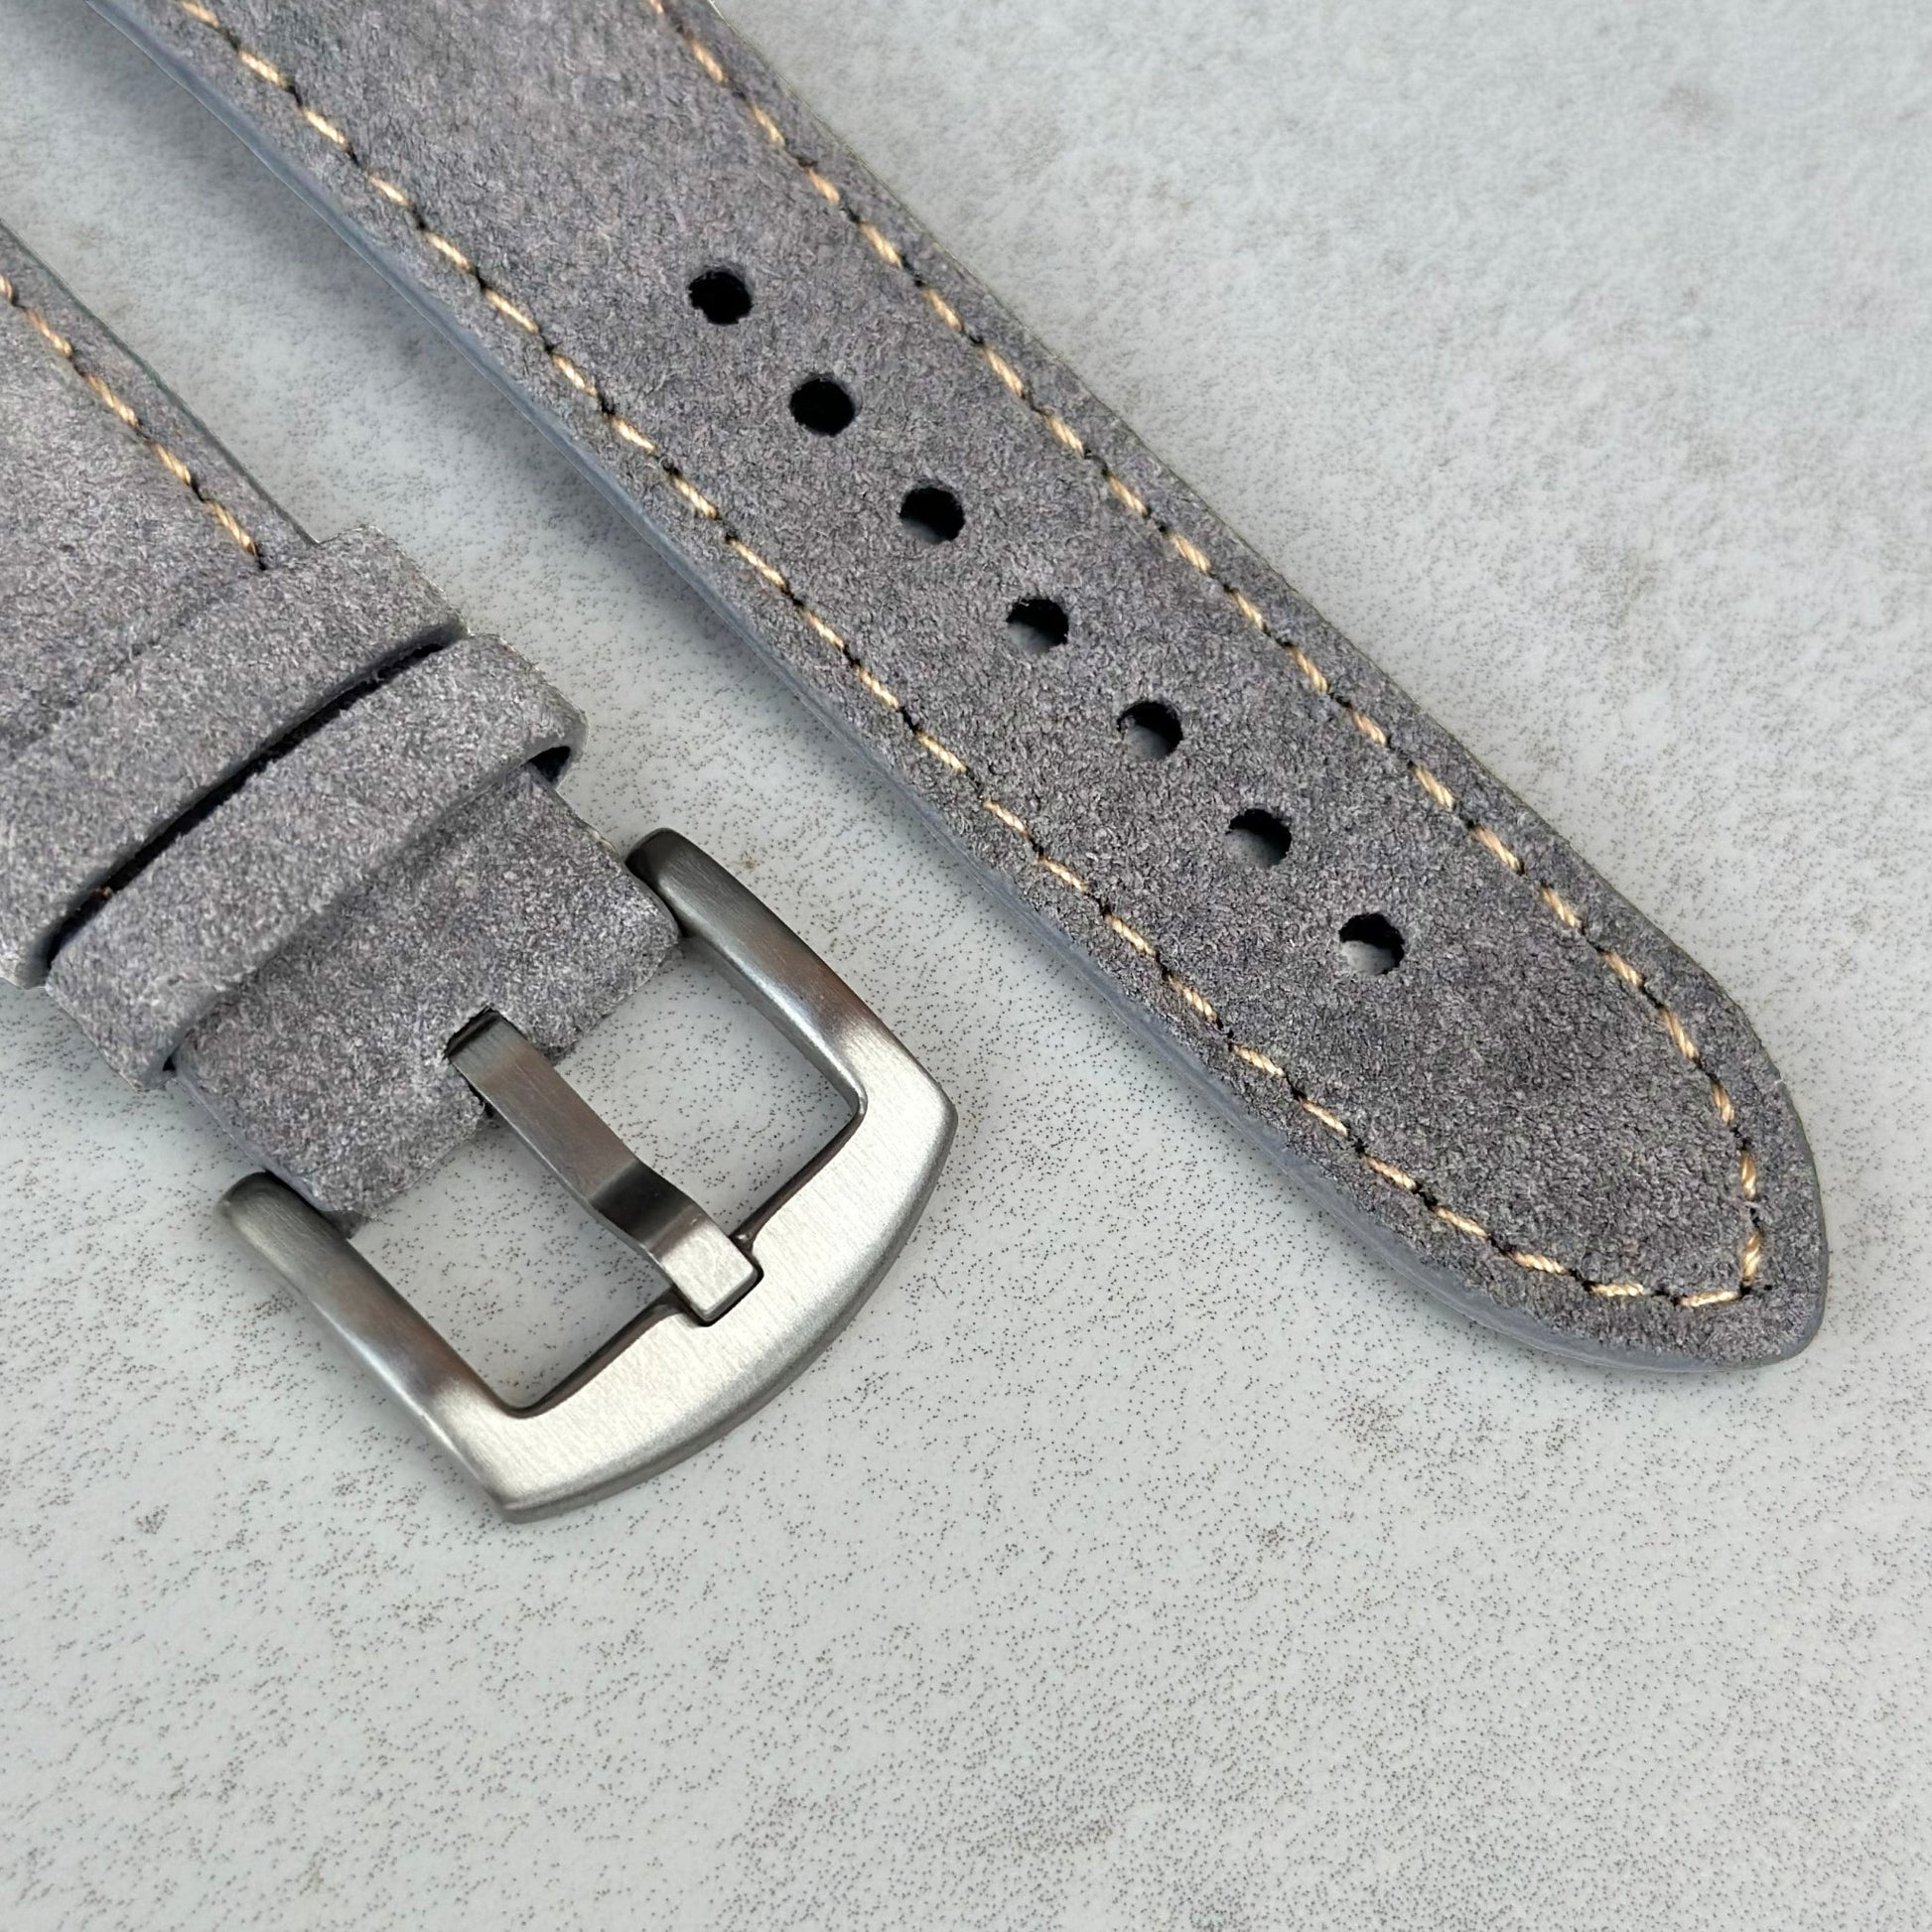 Brushed 316L stainless steel buckle on the Paris light grey suede watch strap. Watch And Strap